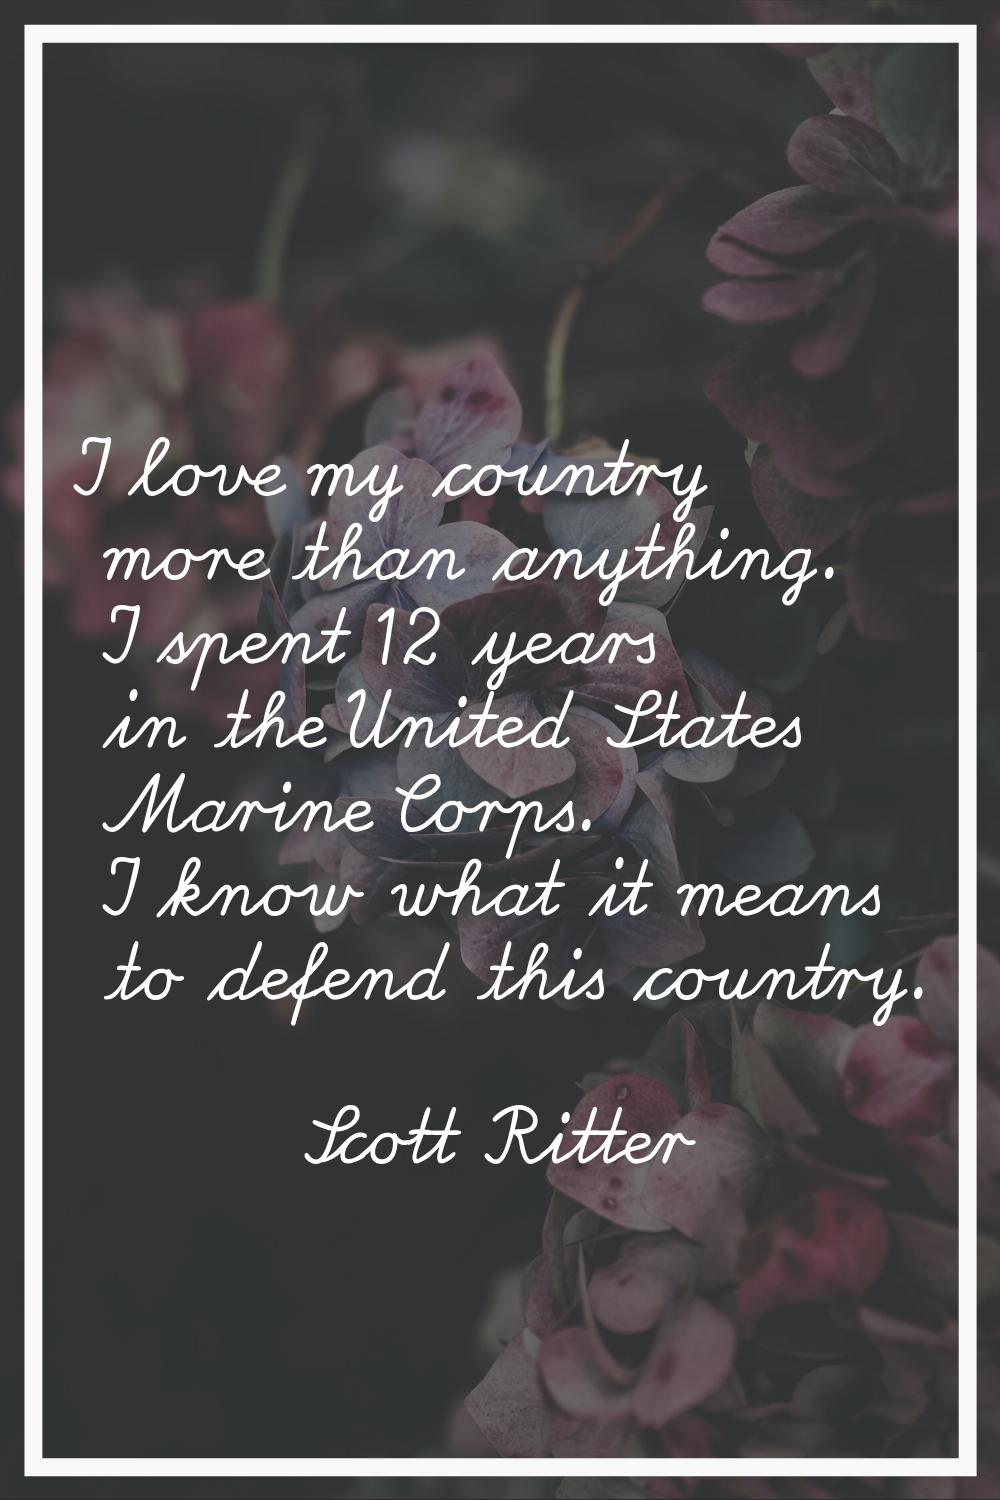 I love my country more than anything. I spent 12 years in the United States Marine Corps. I know wh